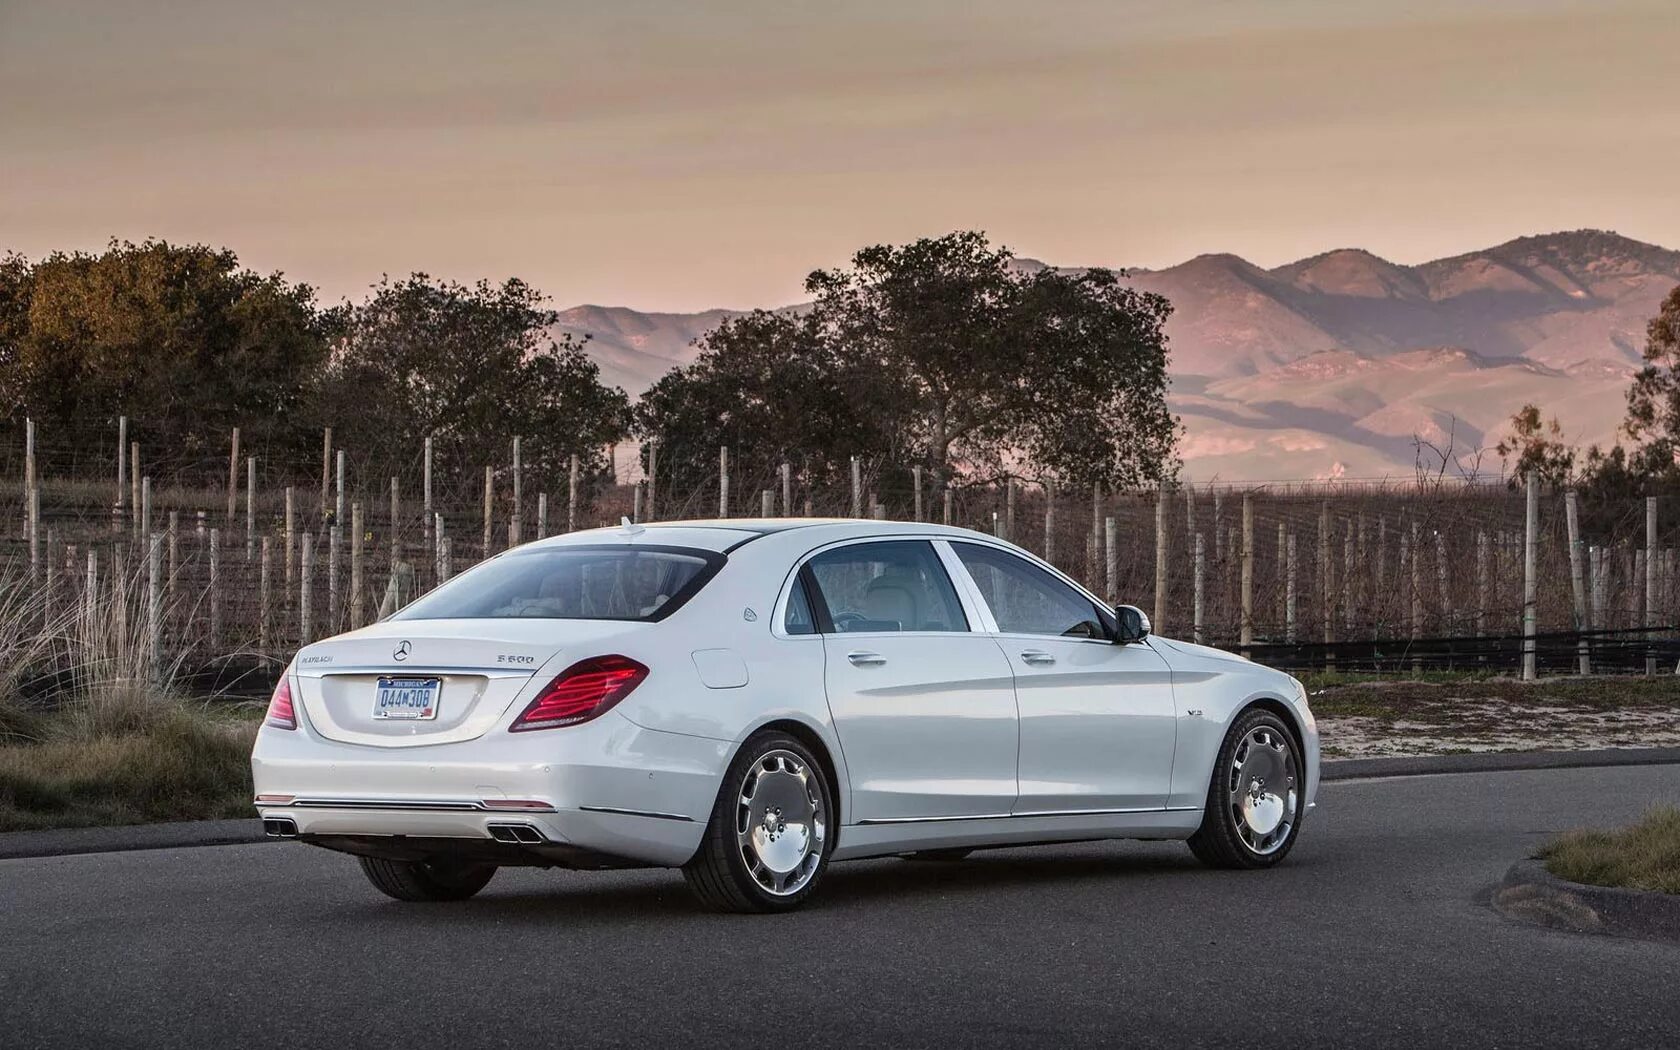 Мерседес s650. Mercedes s class s600. Майбах s600. Мерседес Майбах. Mercedes Maybach s600.